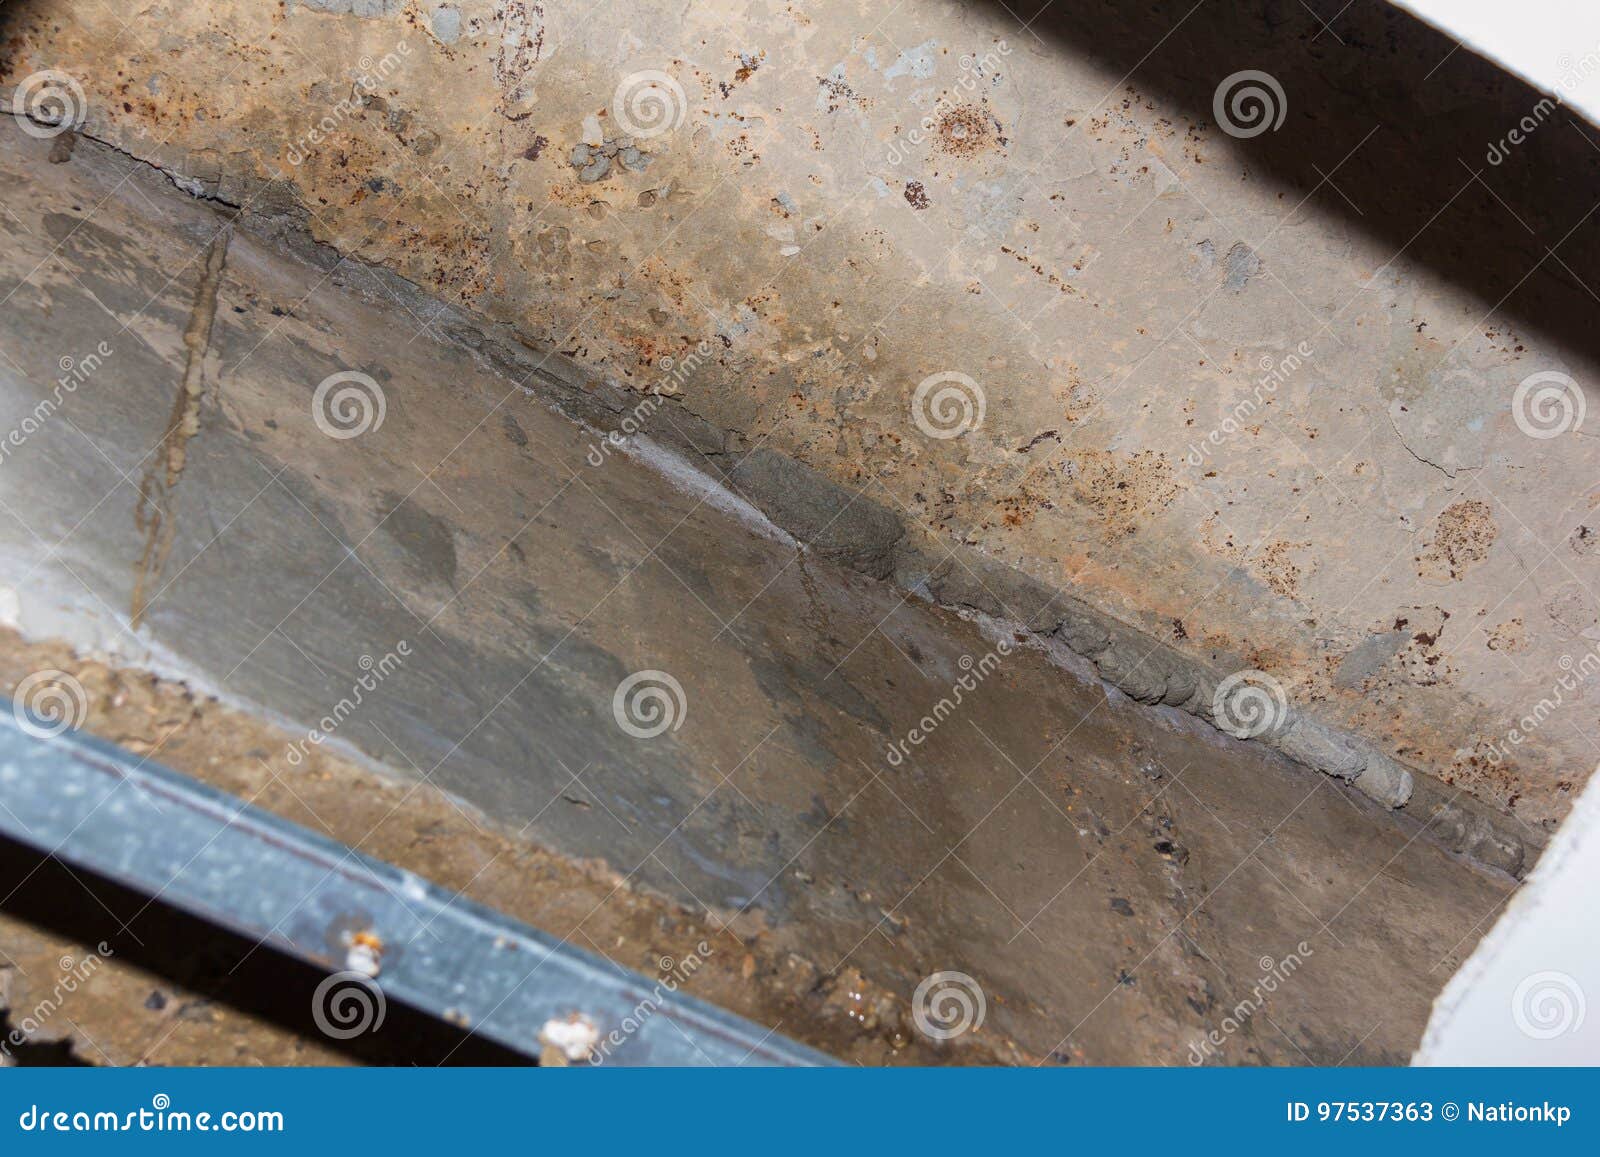 Ceiling Concret Crack Water Leak Stock Image Image Of House